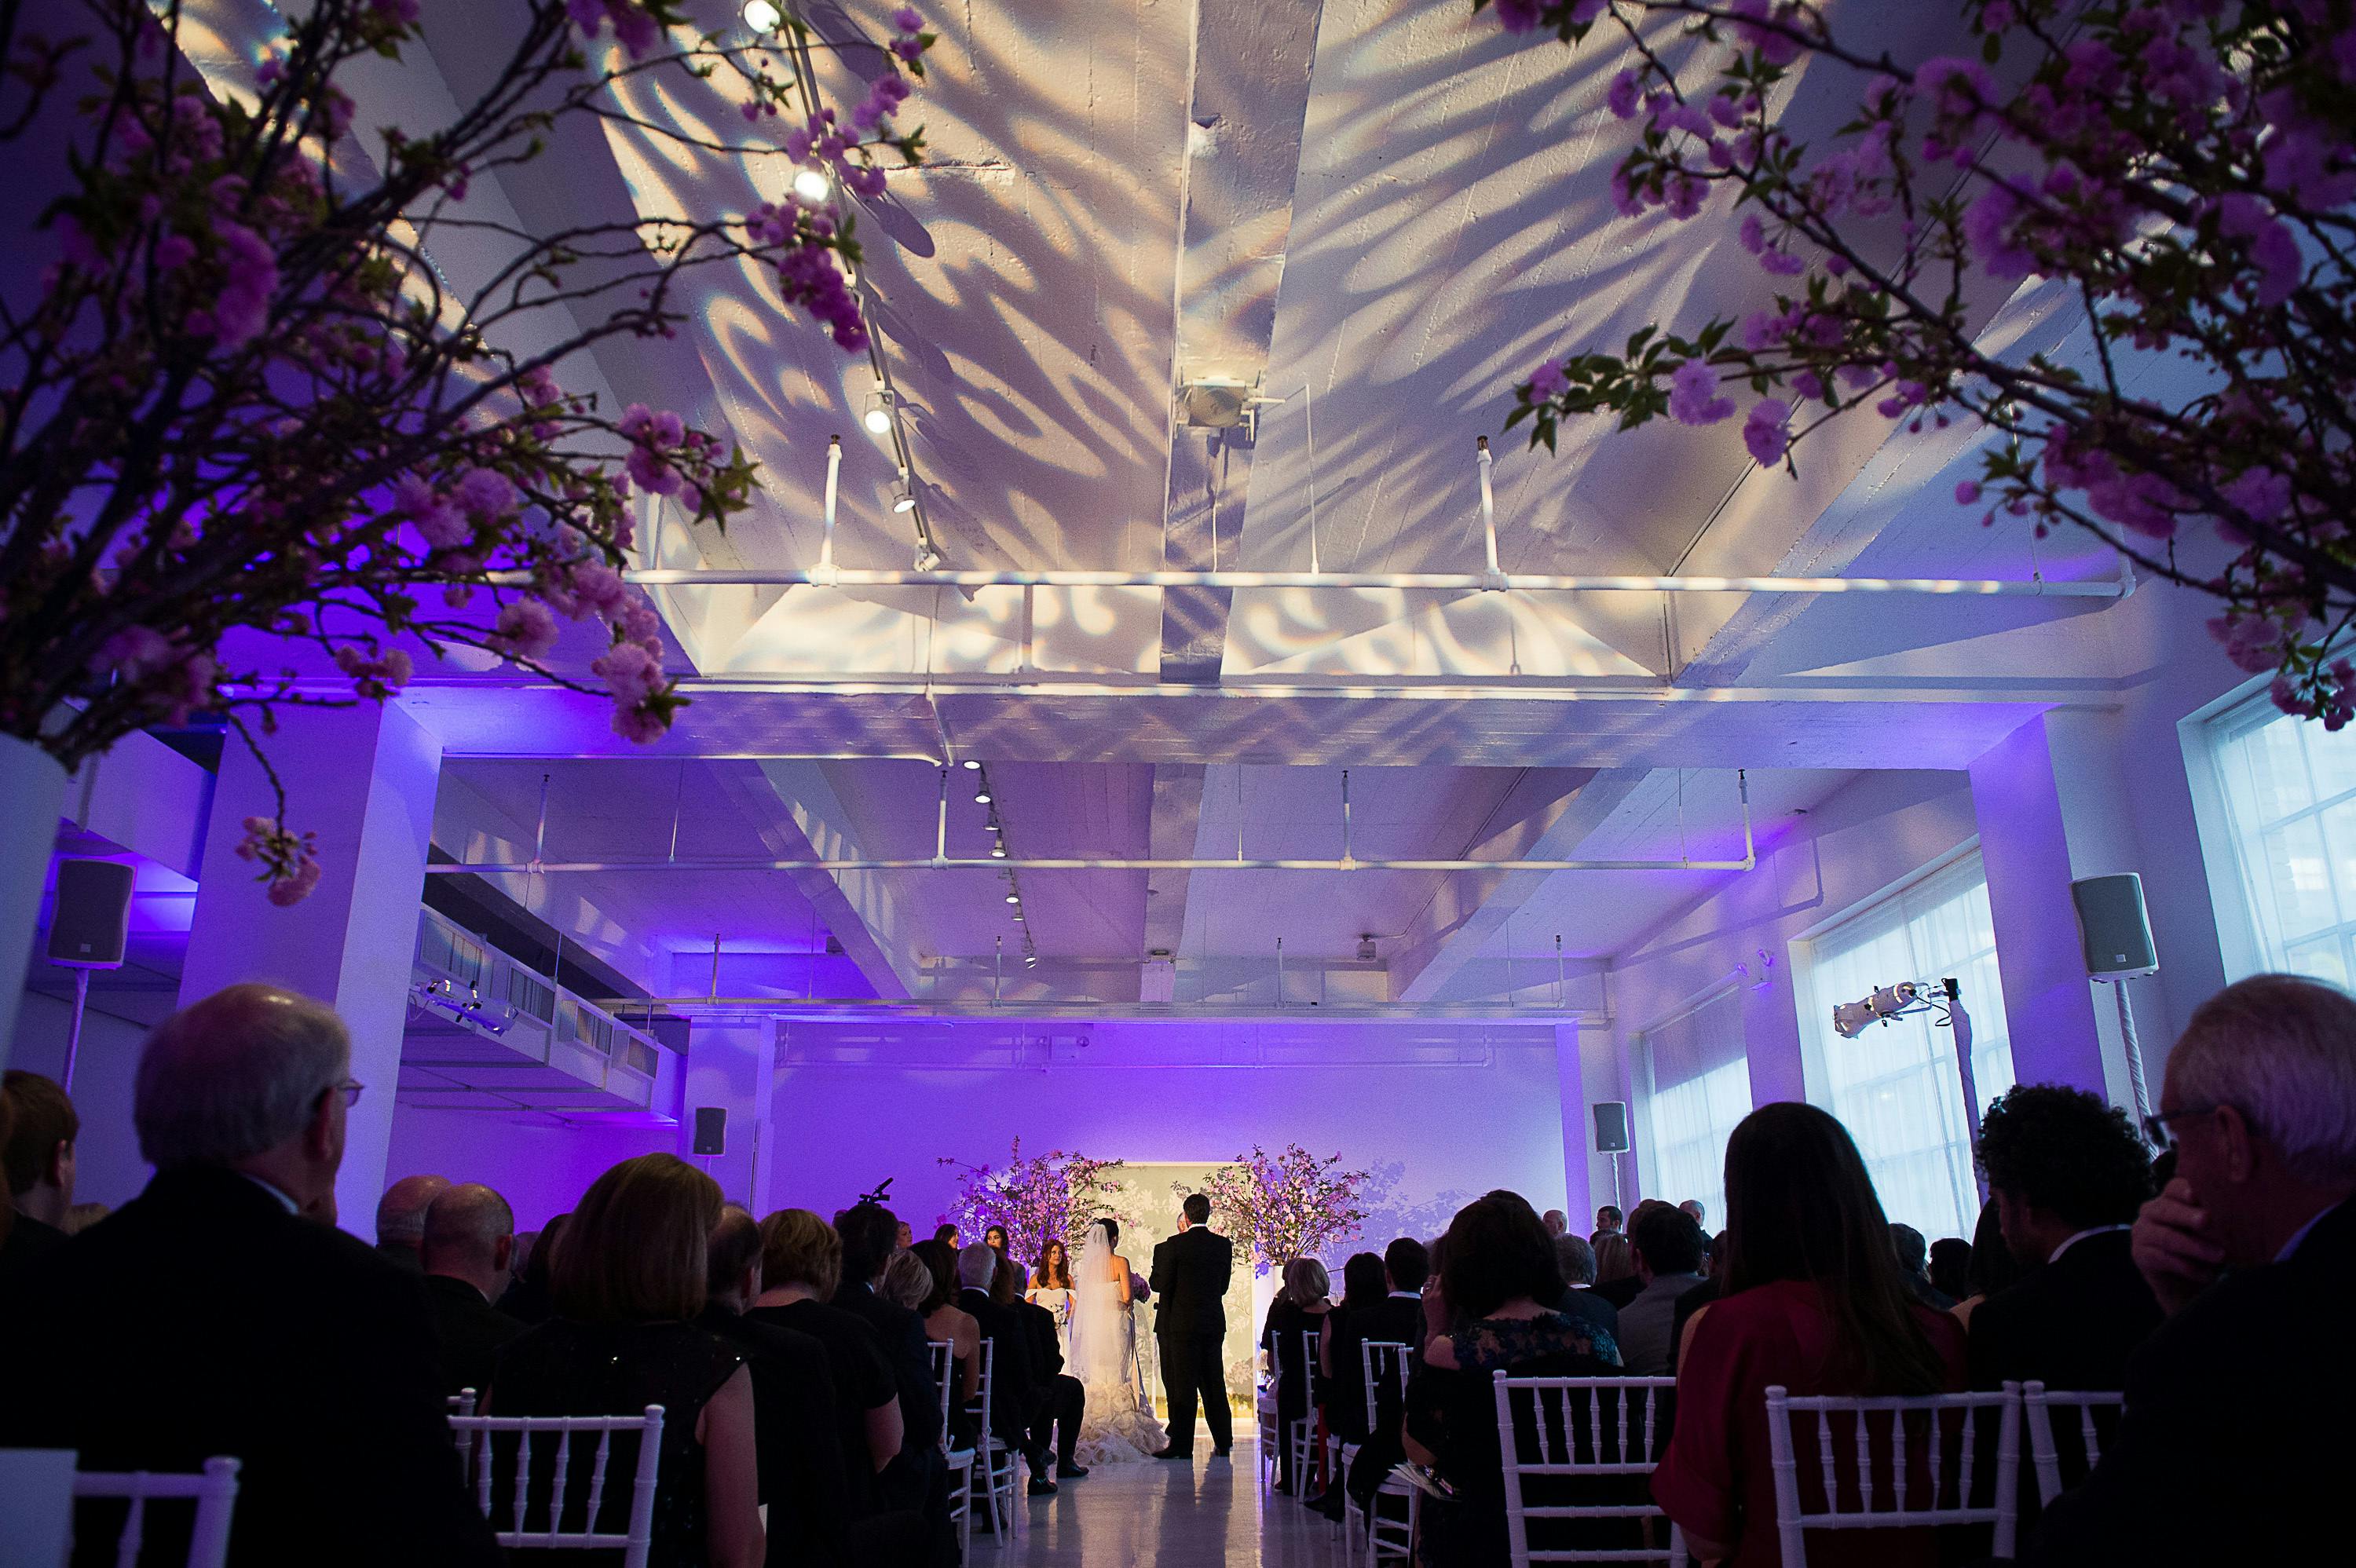 Wedding Ceremony With Shadows and Light Displayed on Ceiling Above Aisle | PartySlate